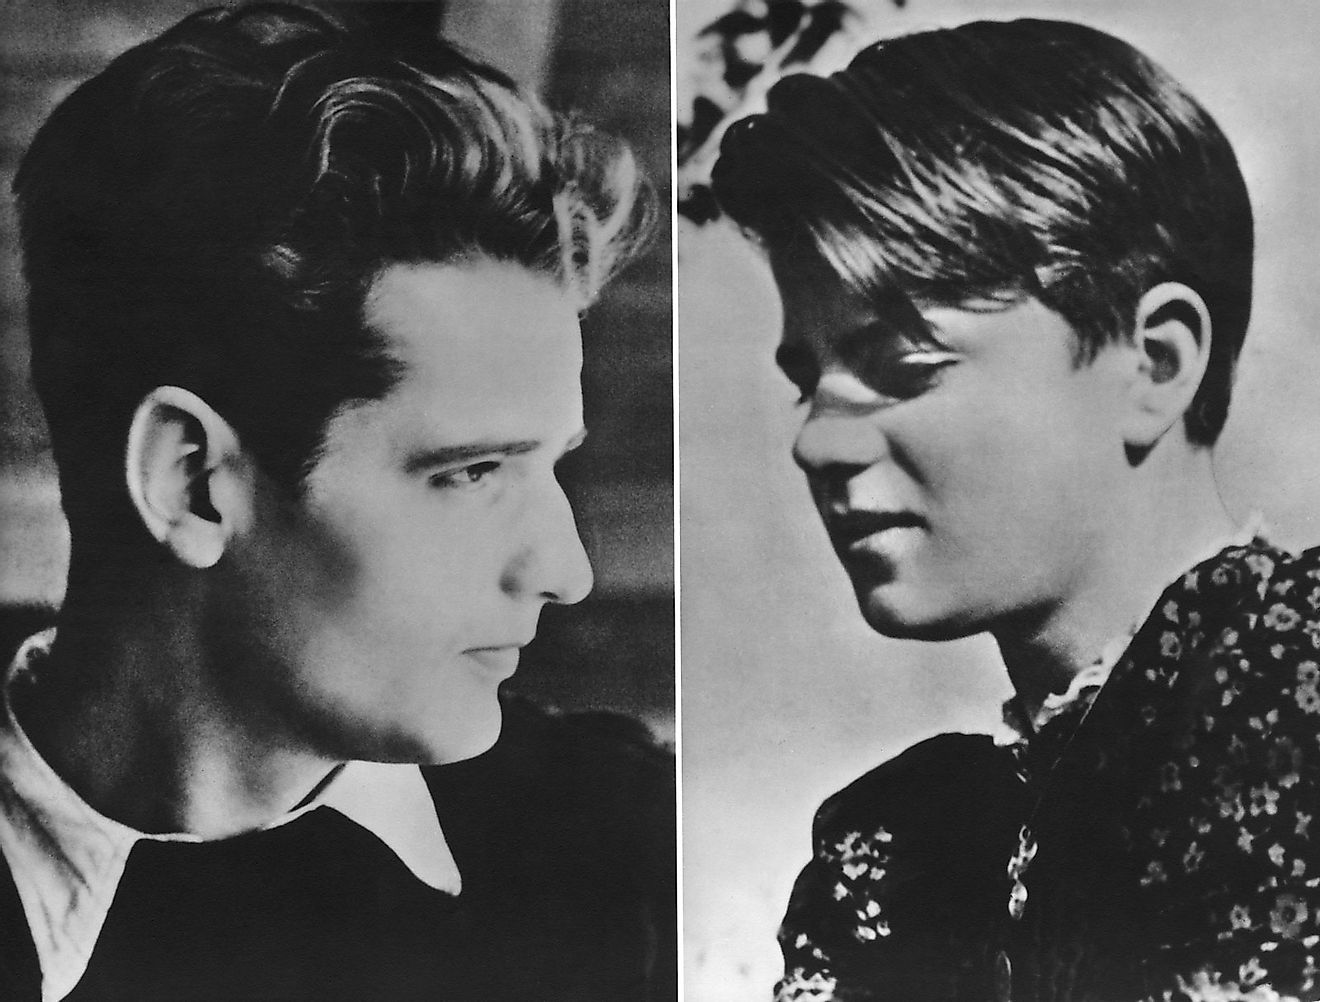 Hans and Sophie Scholl, c. 1940. Members of the founding group. Image credit: britannica.com